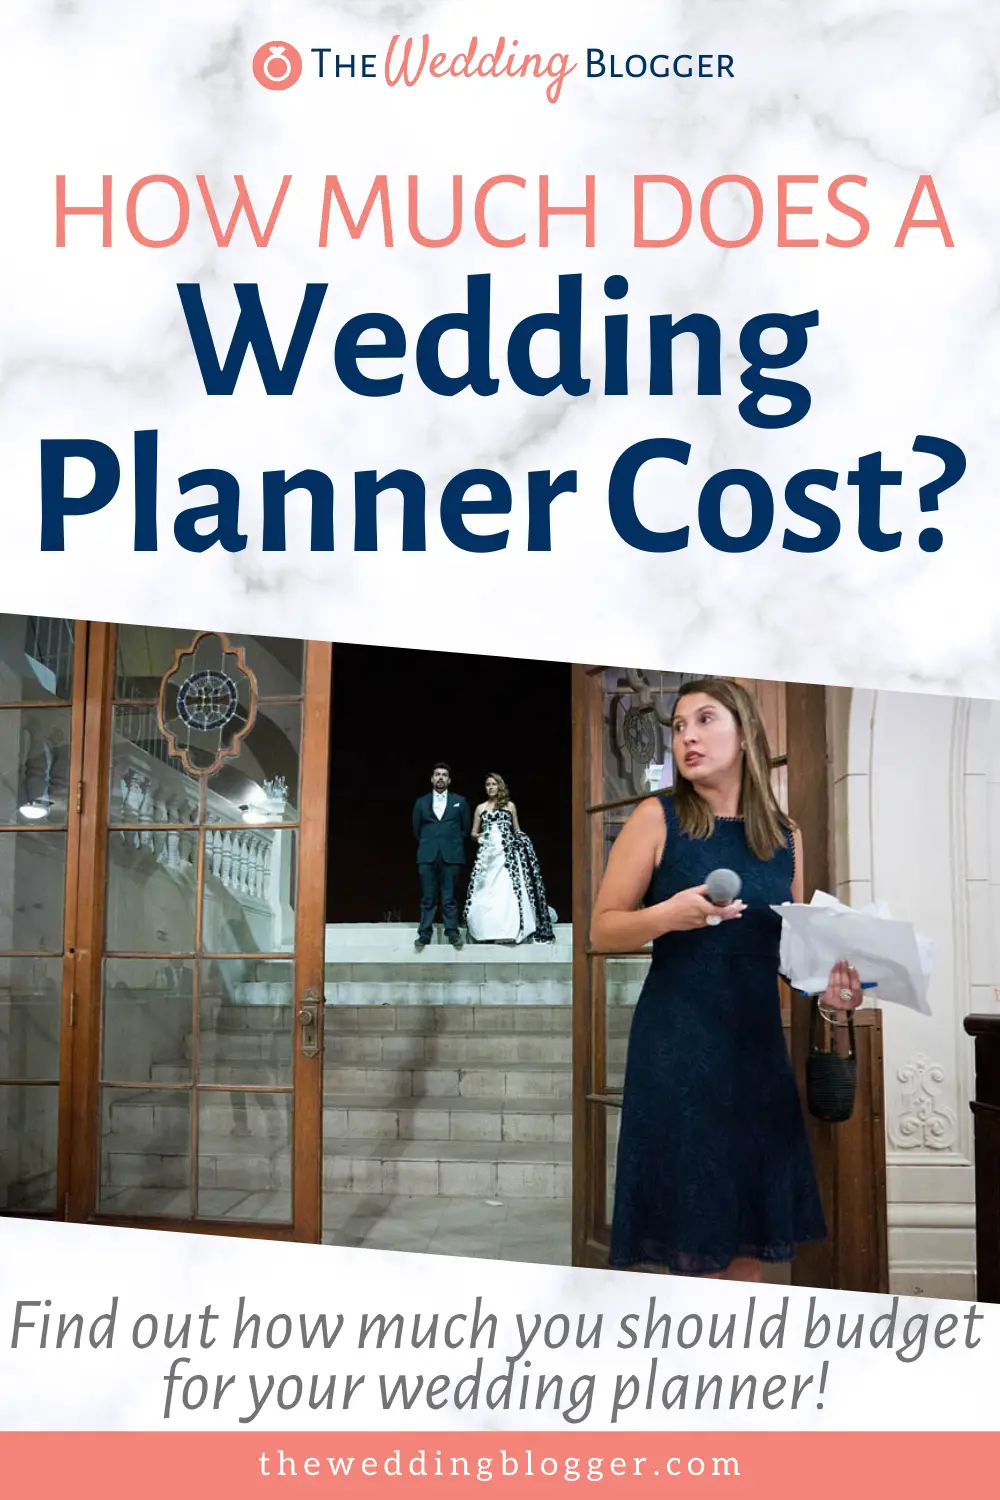 How Much Does a Wedding Planner Cost?